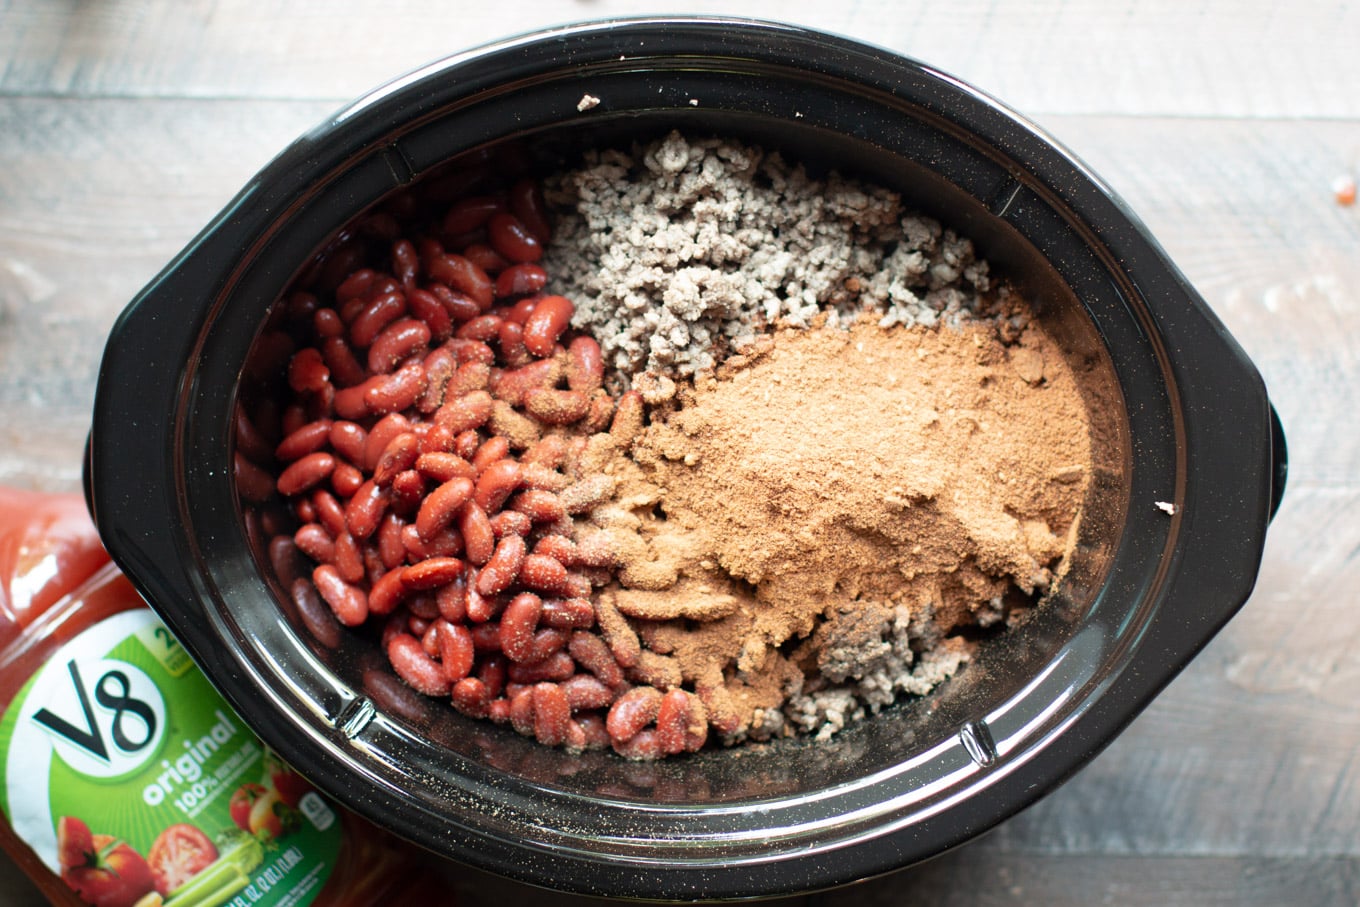 Kidney beans, ground beef and chili seasoning in separate piles in a slow cooker.